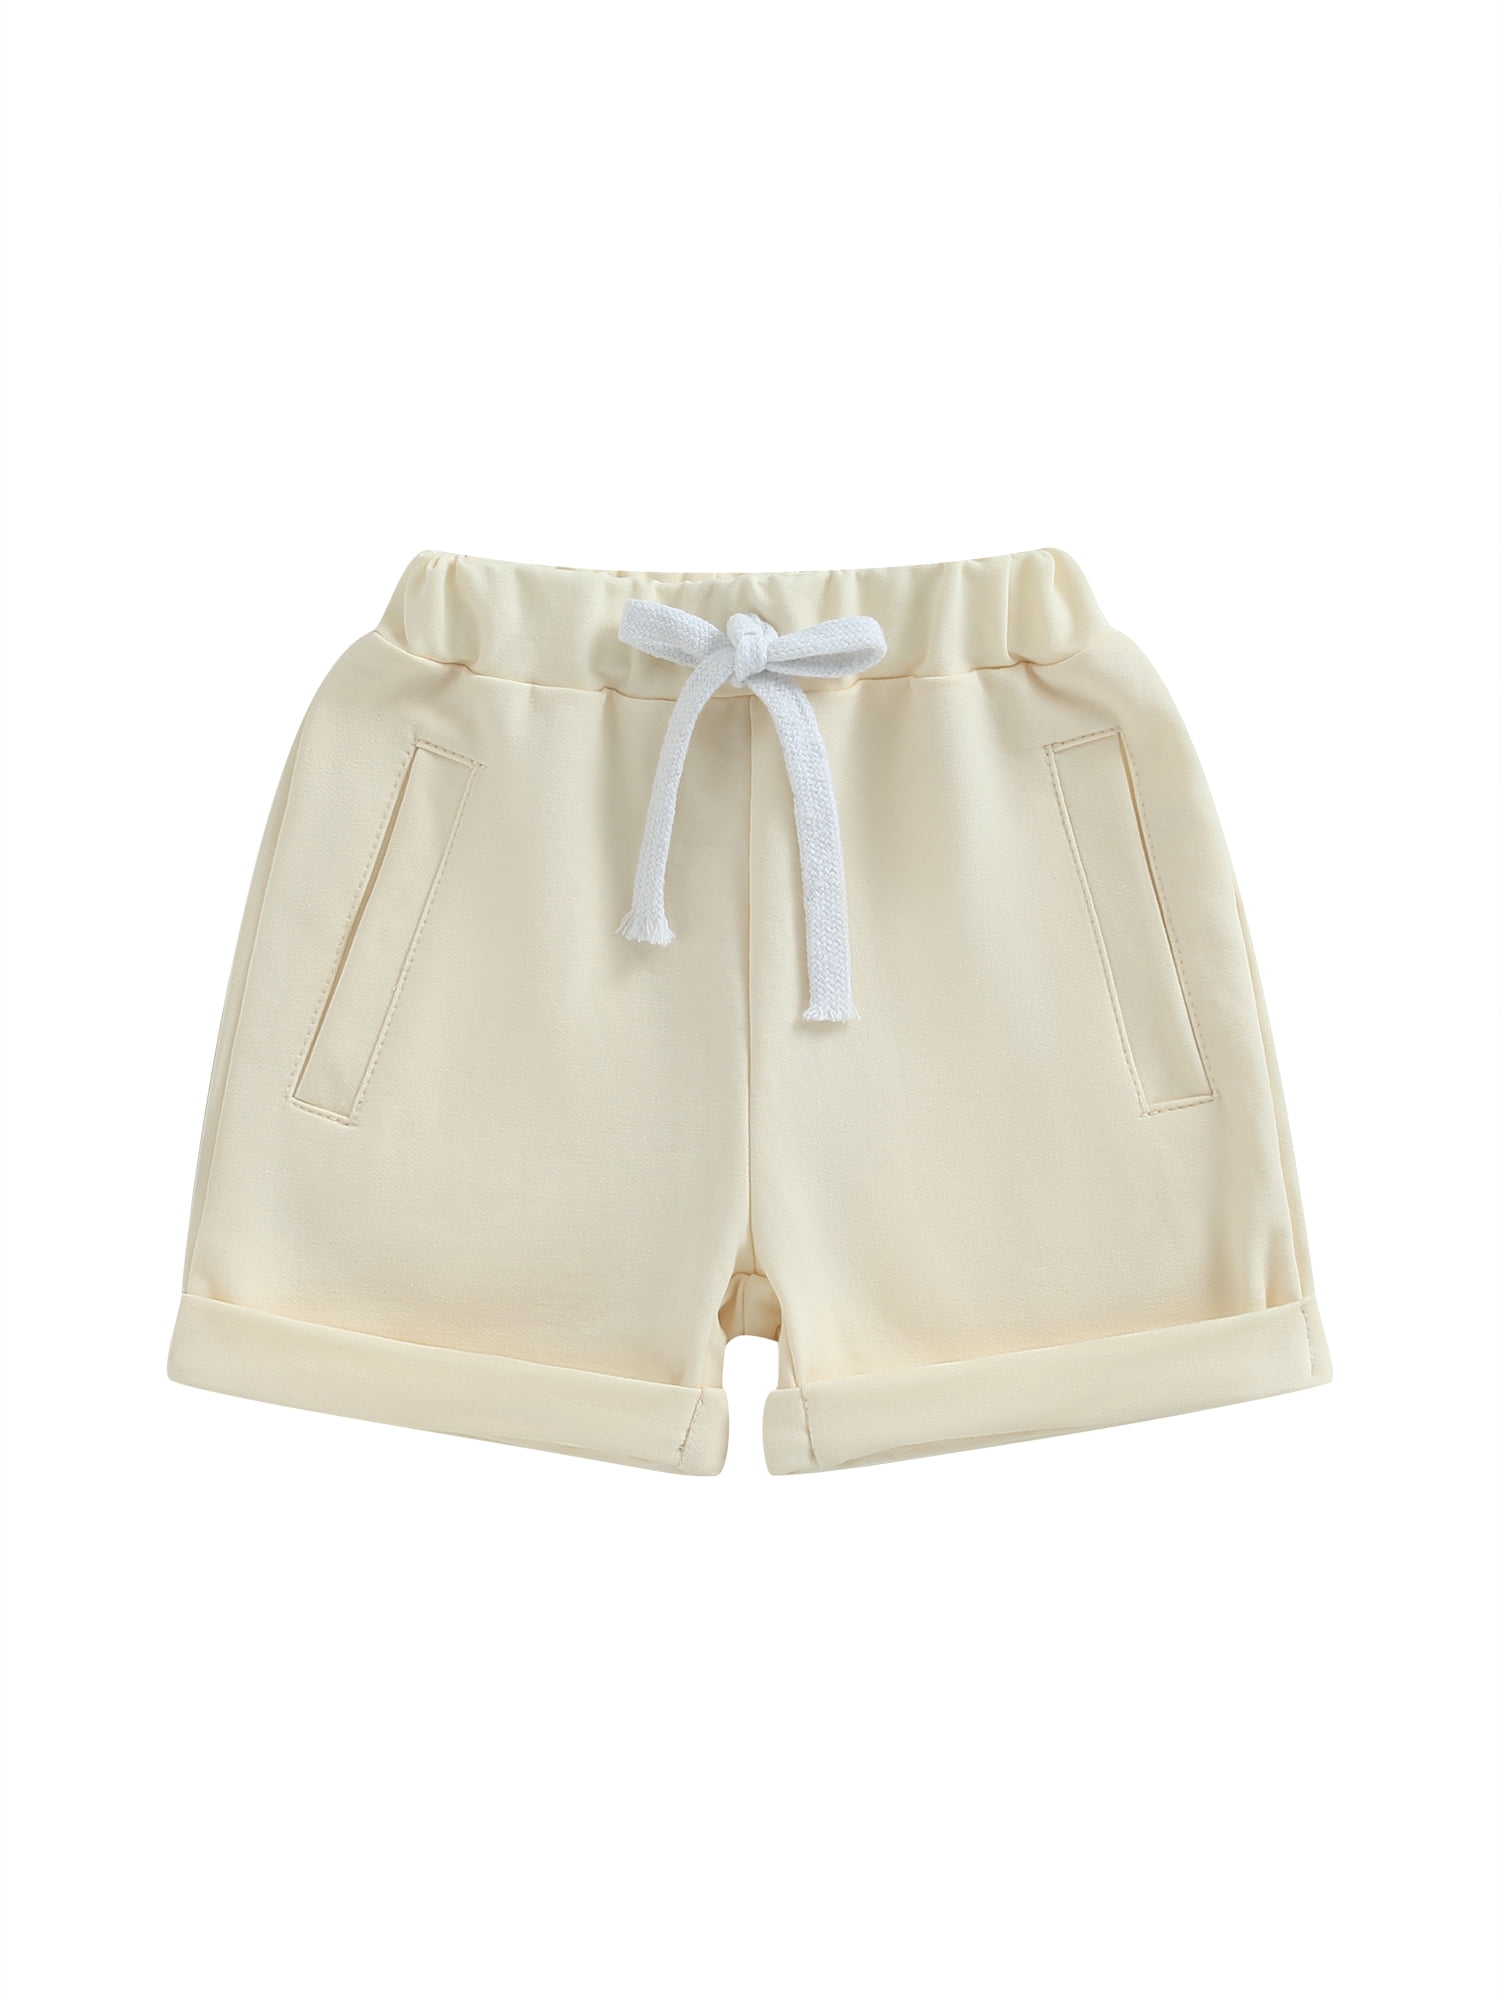 Sunisery Toddler Baby Boys Athletic Shorts Solid Color Elastic Casual  Shorts Short Pants Infant Newborn Shorts Beige 2-3 Years 